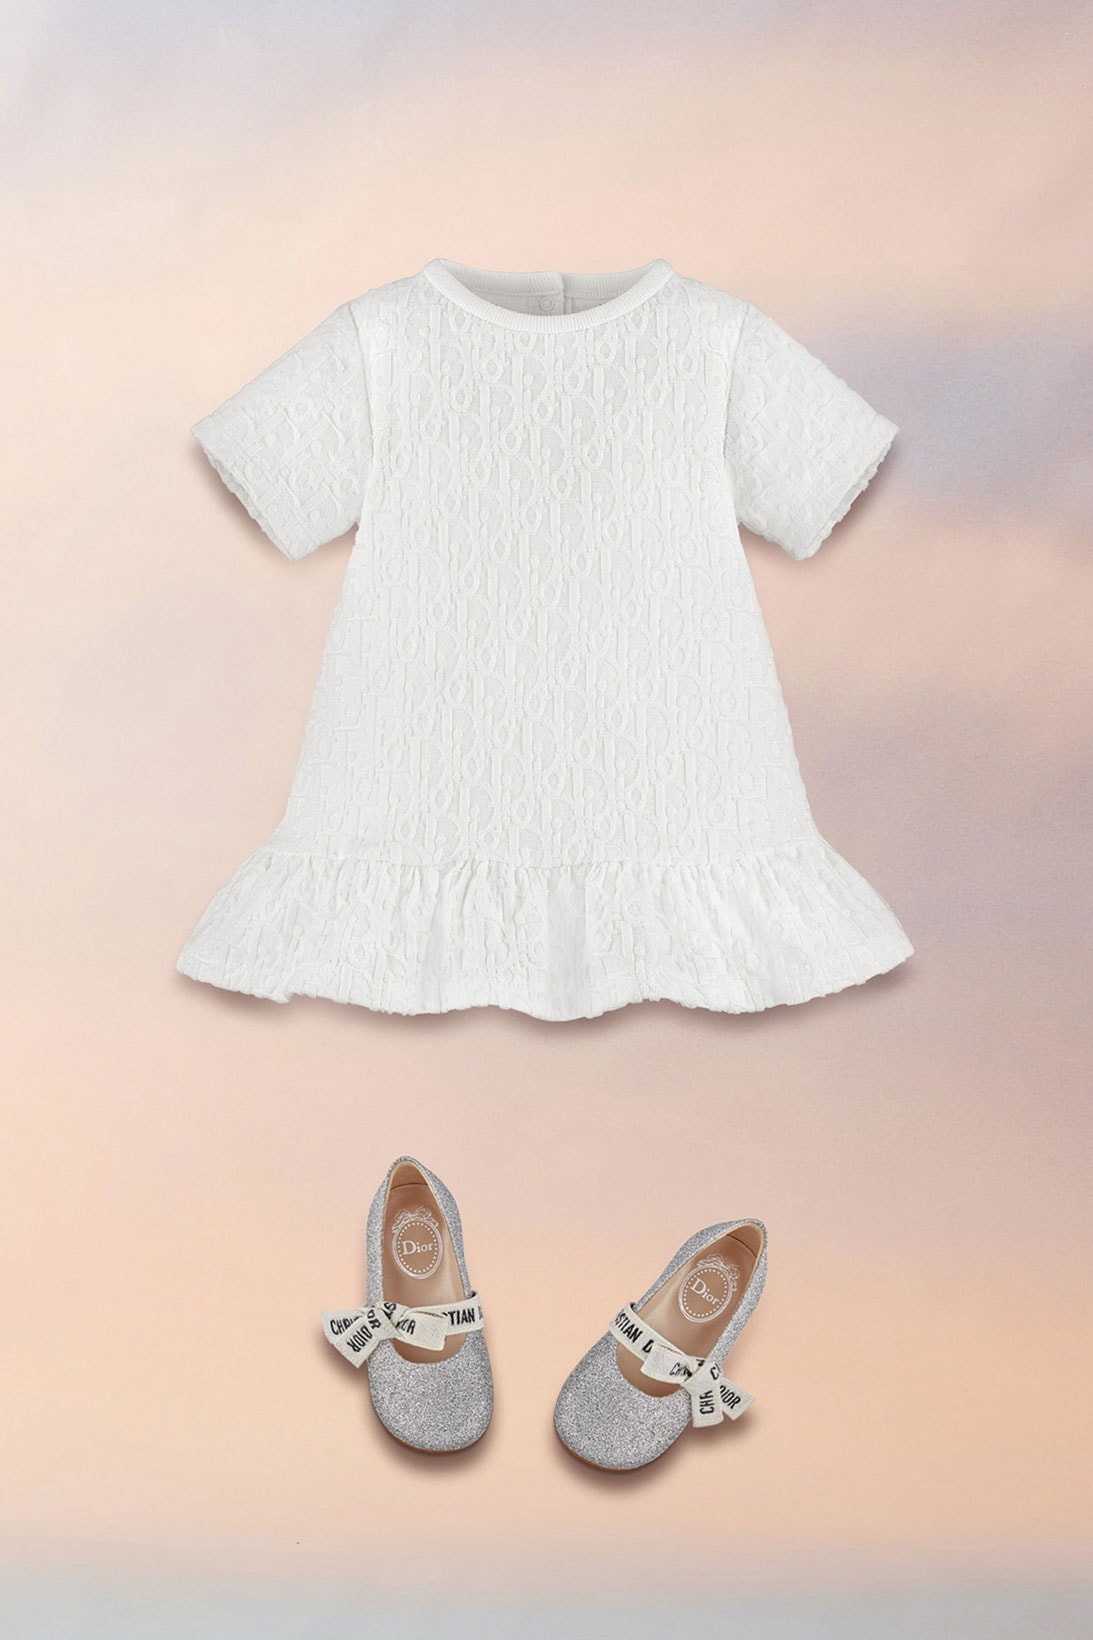 dior spring summer 2021 ss21 kids collection little girls toddlers dress white shoes